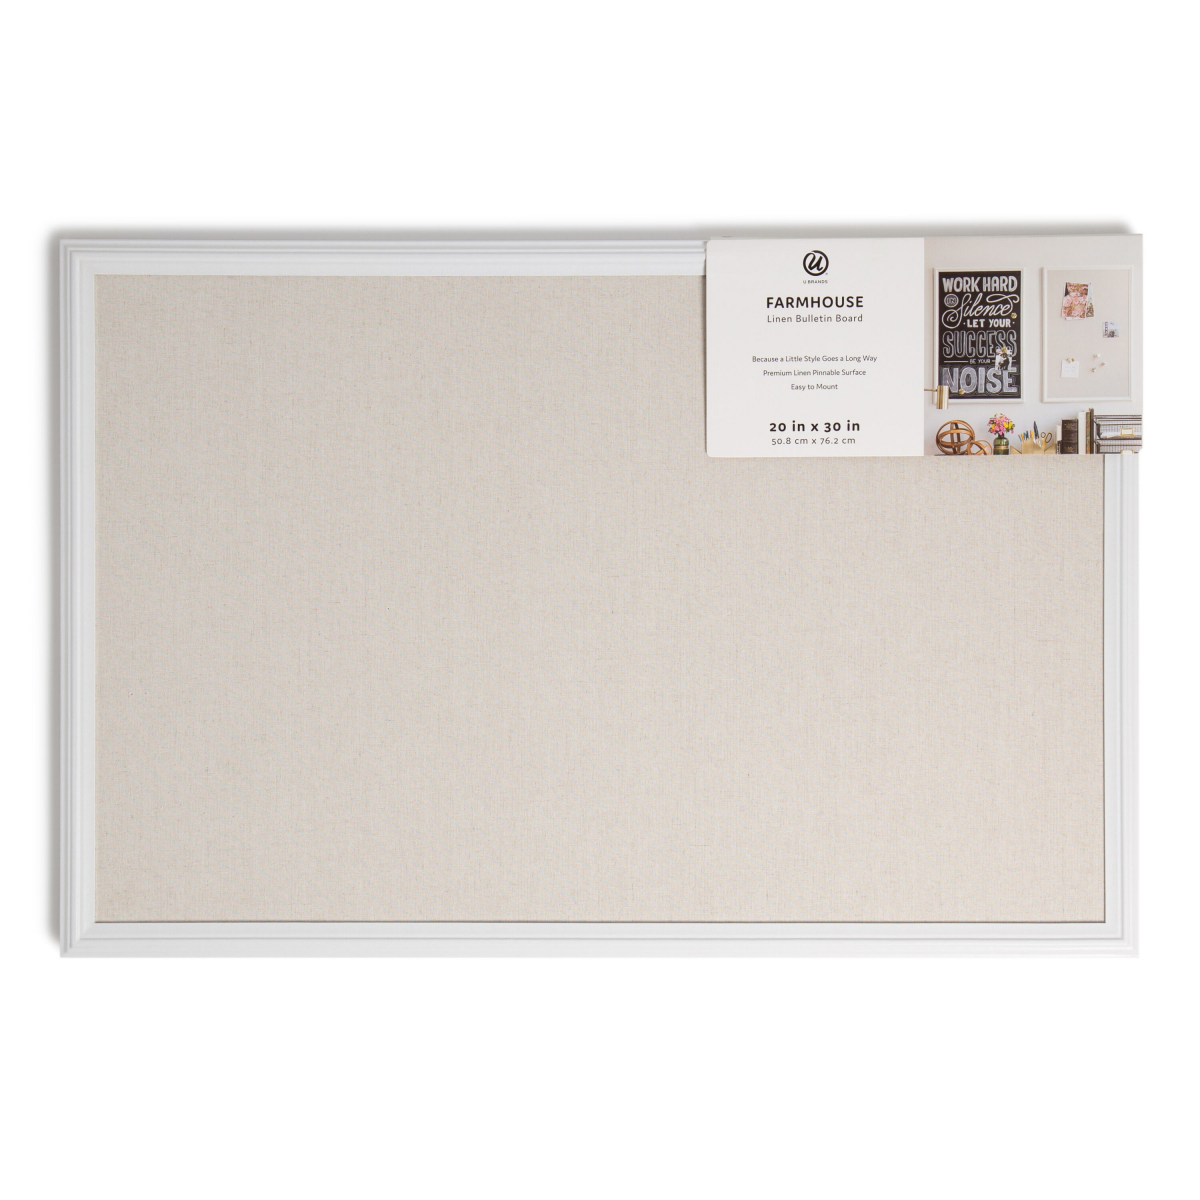 slide 1 of 7, U Brands Farmhouse Linen Bulletin Board, 20x30 in., White Wood Style Frame, Includes Push Pins, 20 in x 30 in